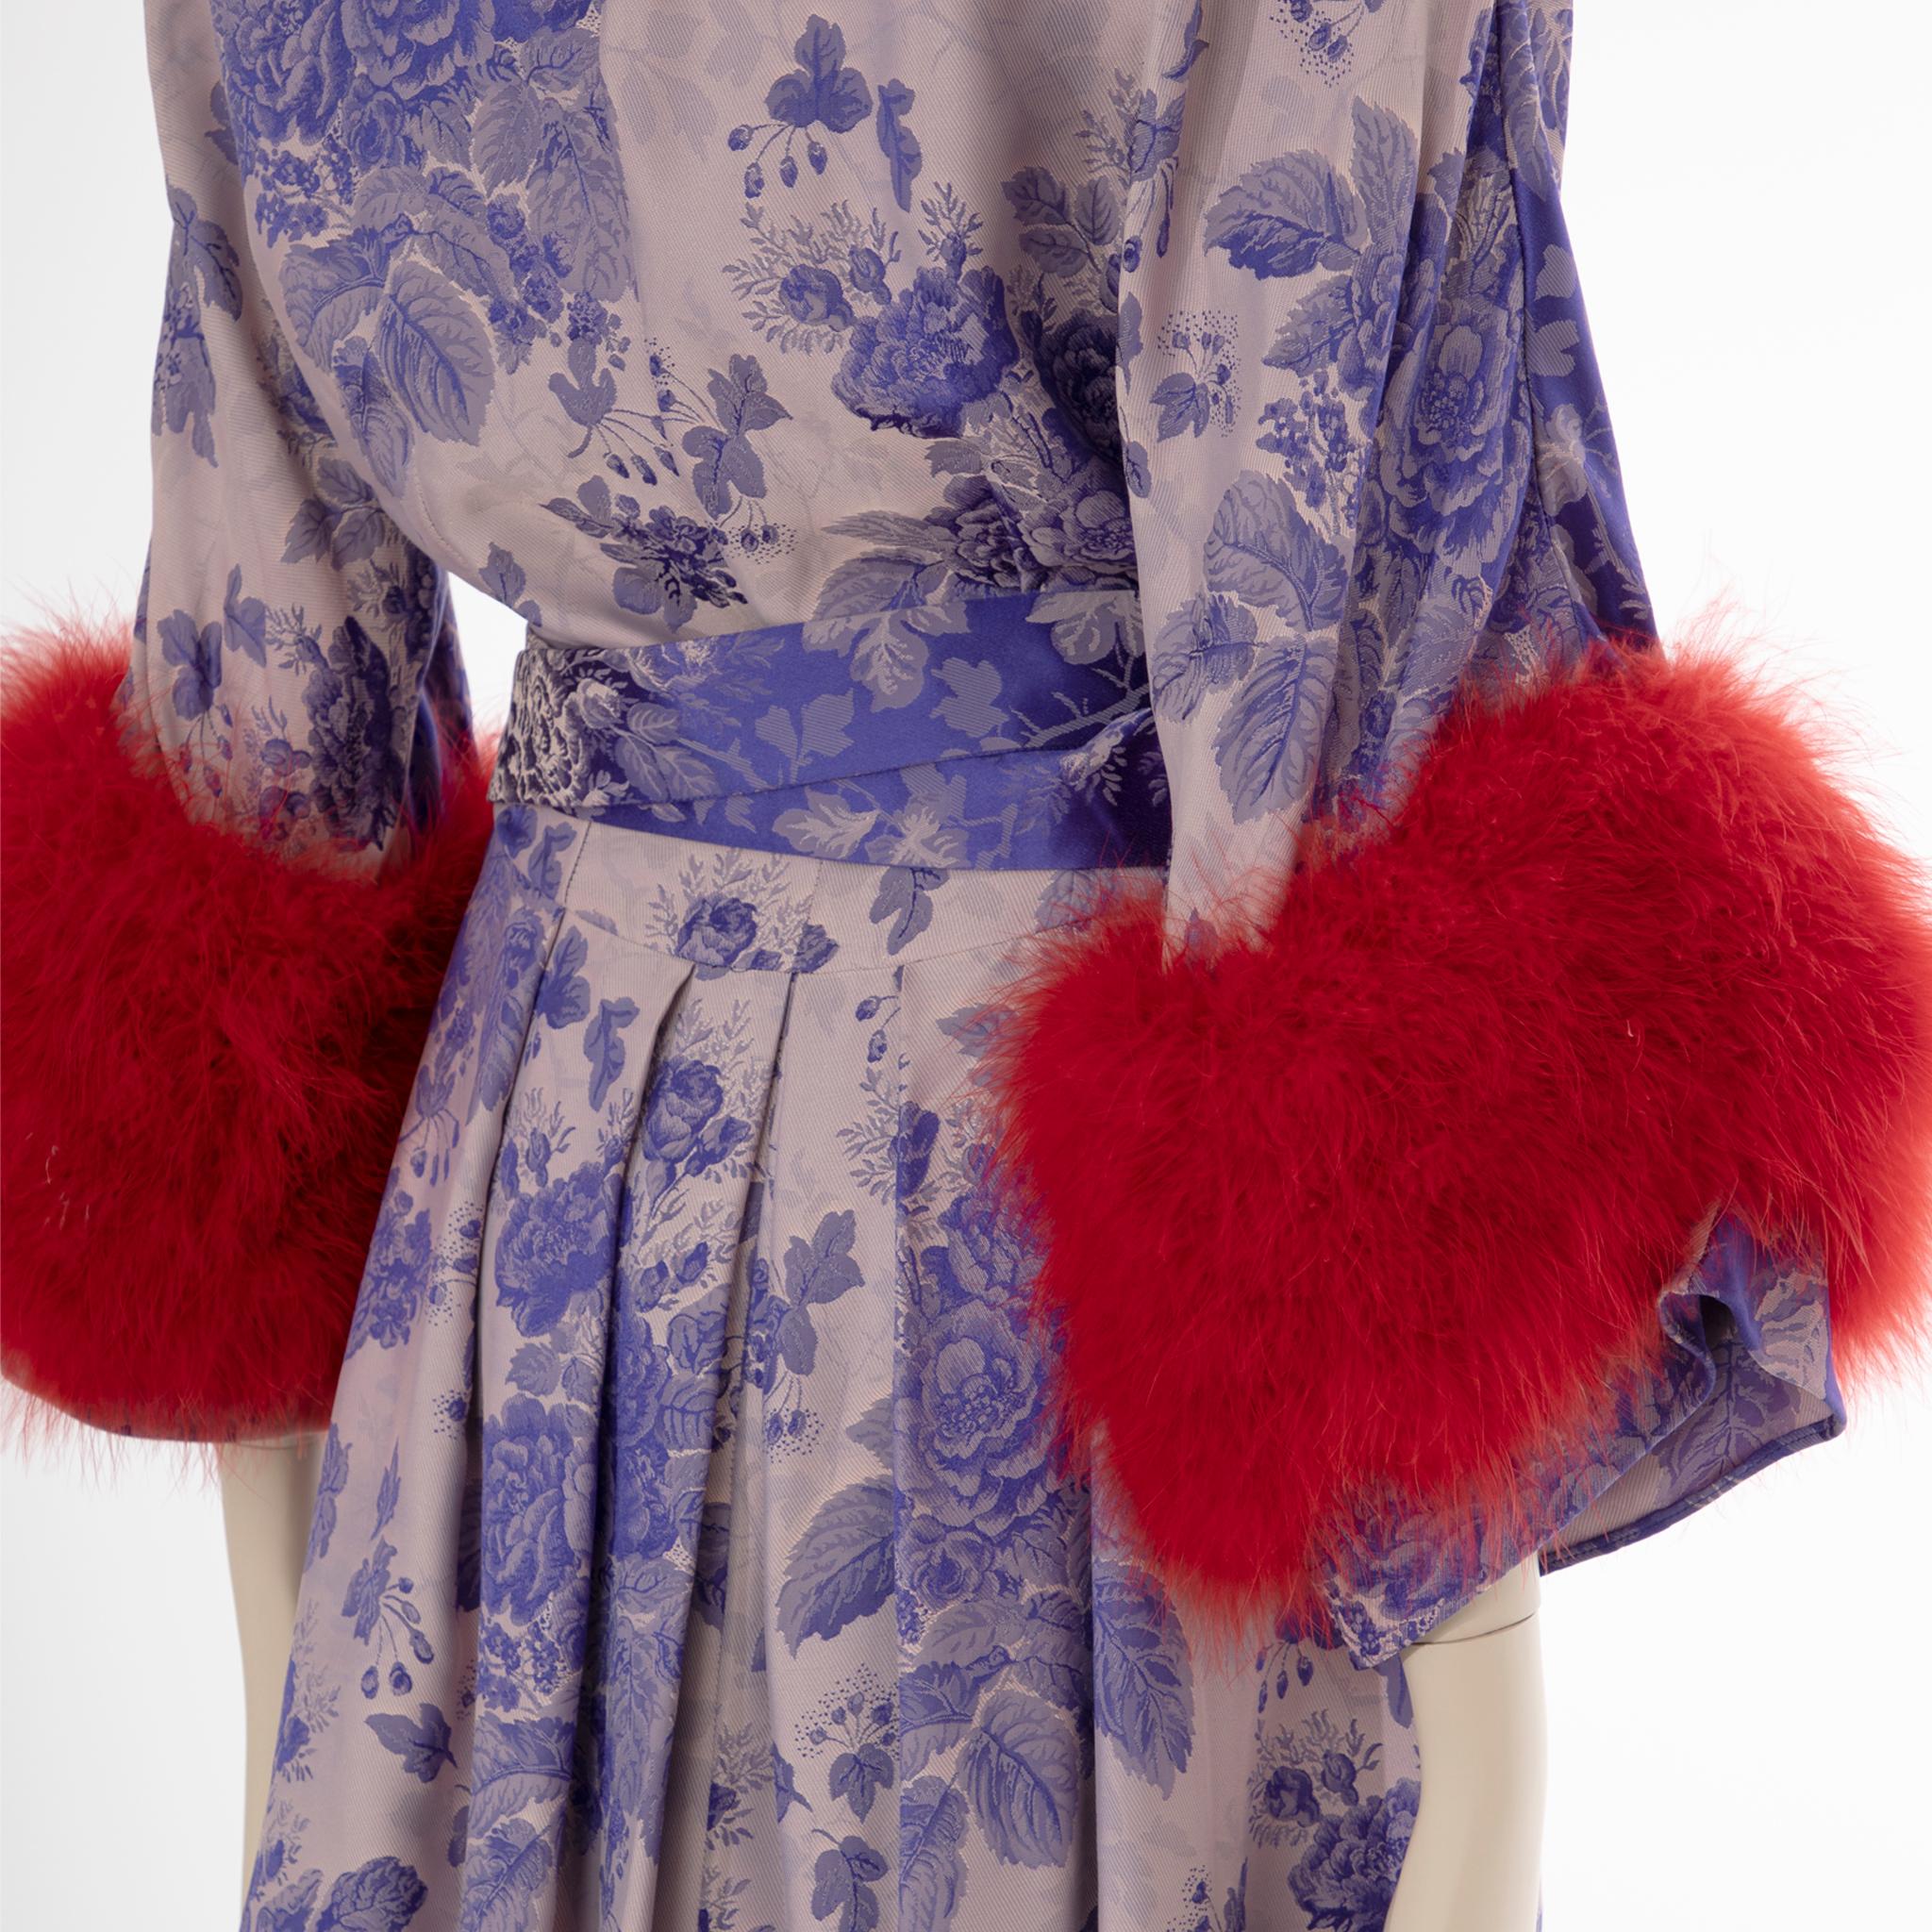 Gucci Floral Jacquard Wrap Dress With Ostrich Feathers 38 It For Sale 7